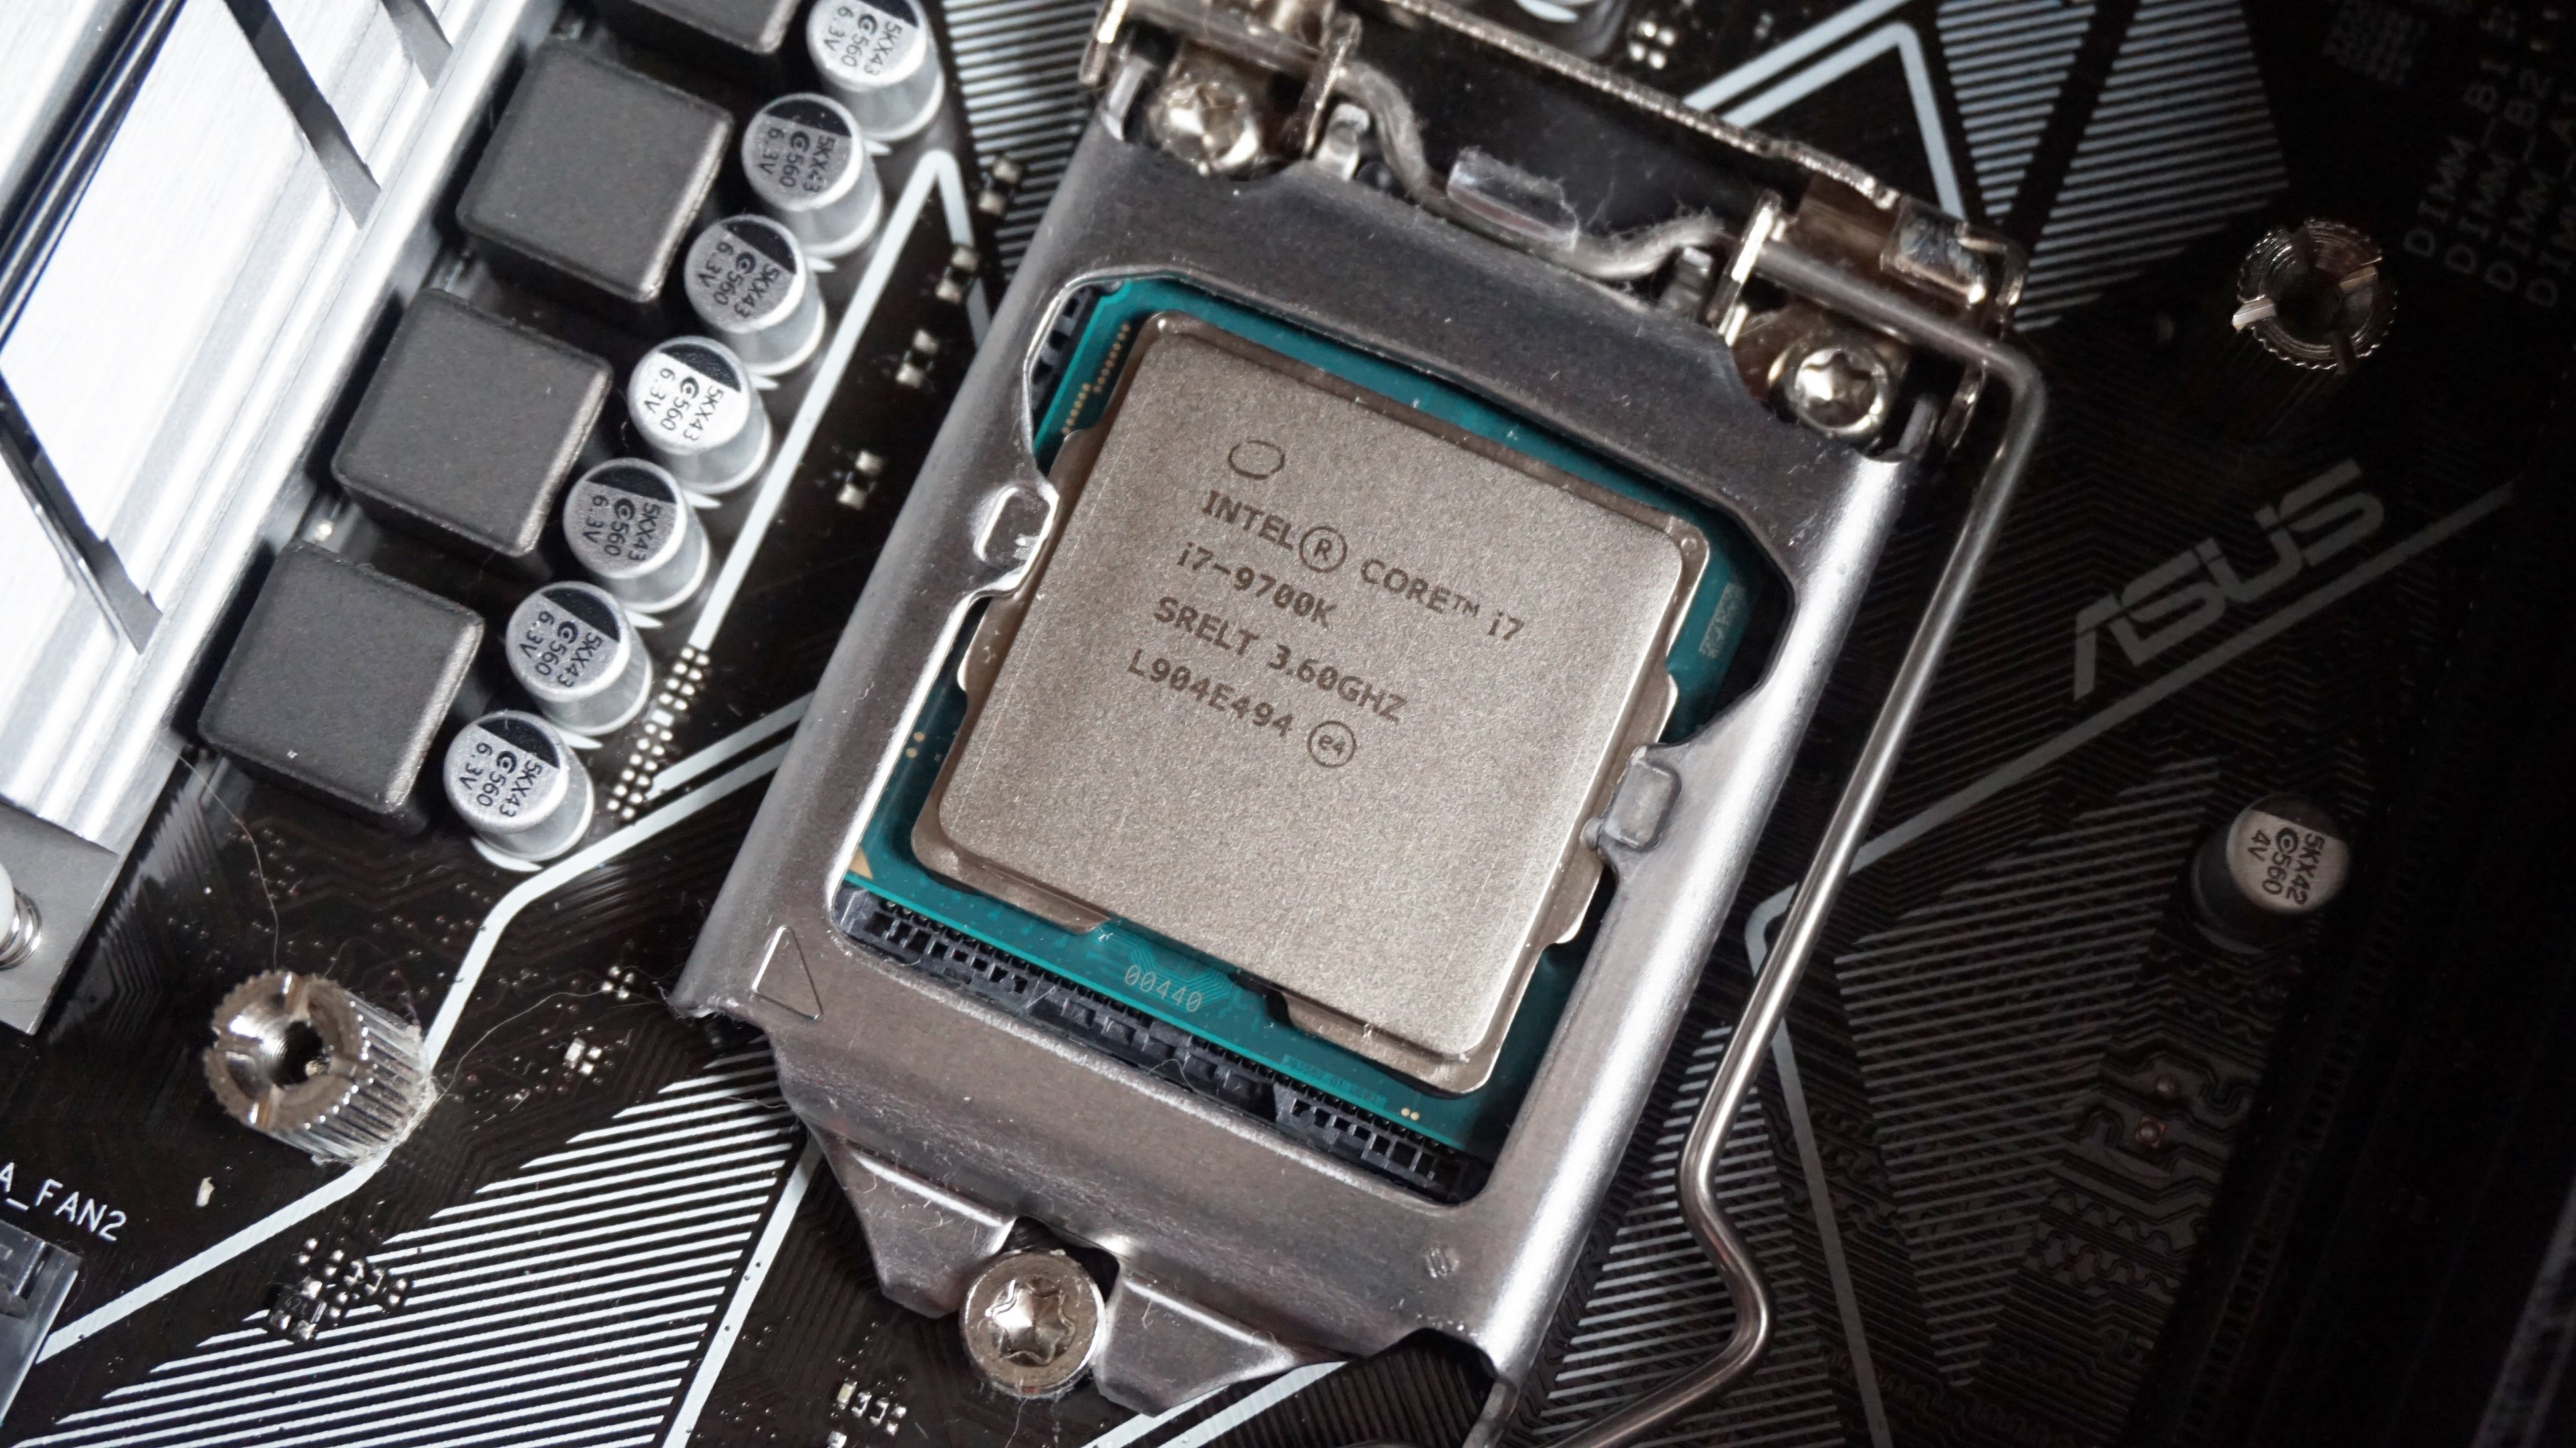 Intel Core i7-9700K review: The best gaming CPU that doesn't break